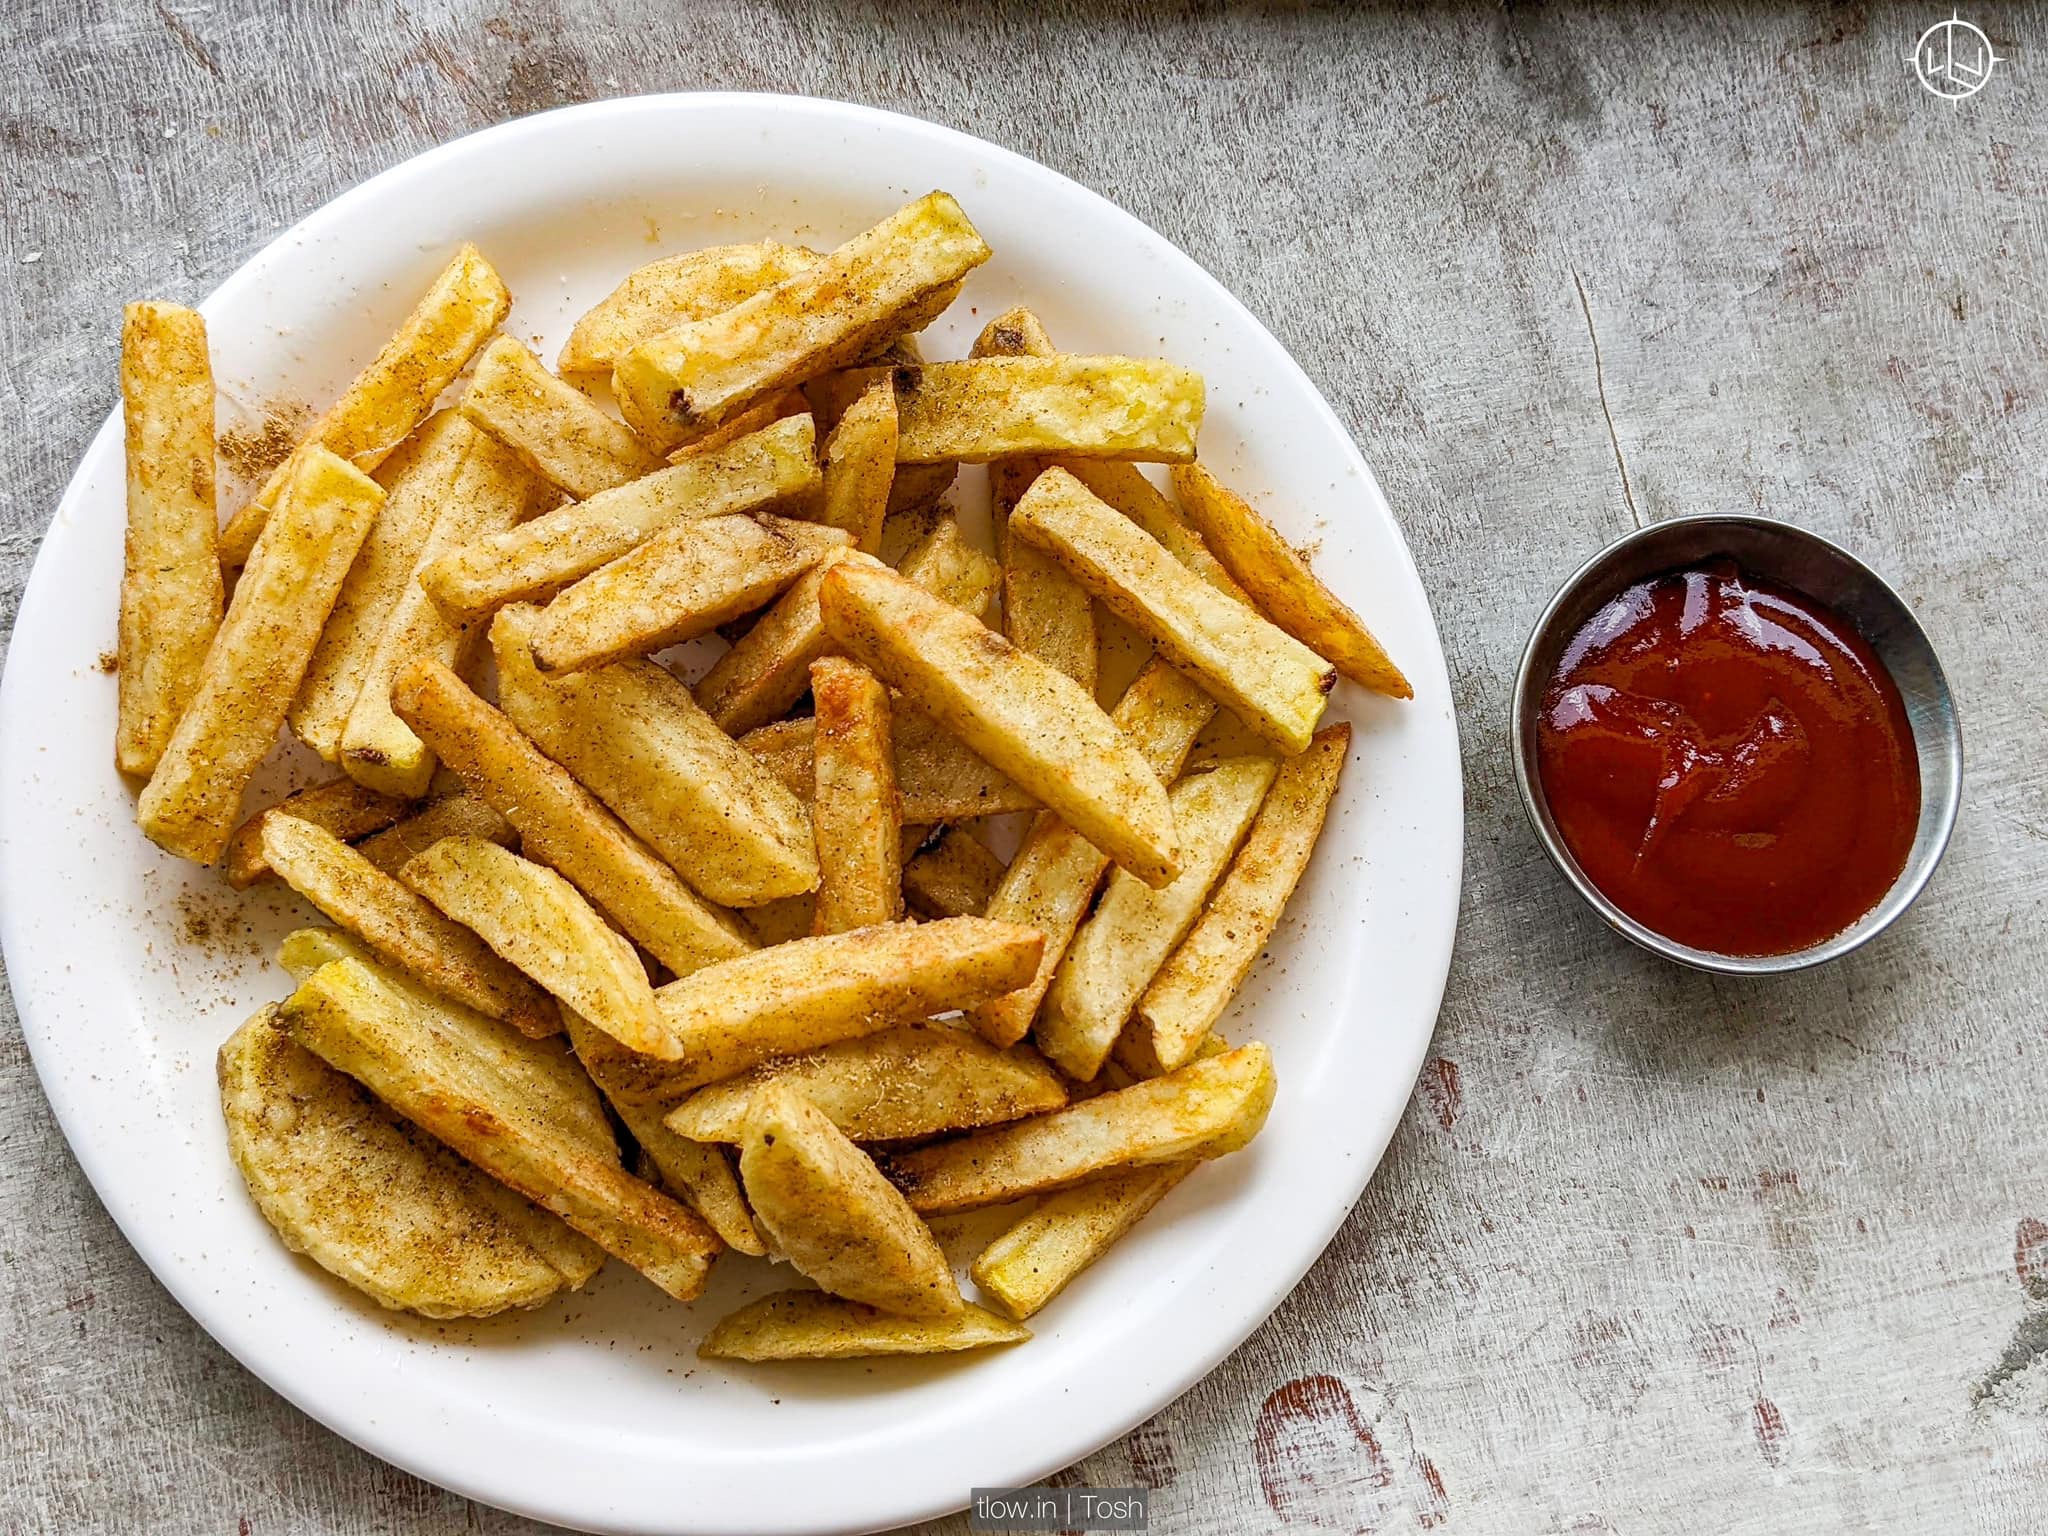 Home made French fries